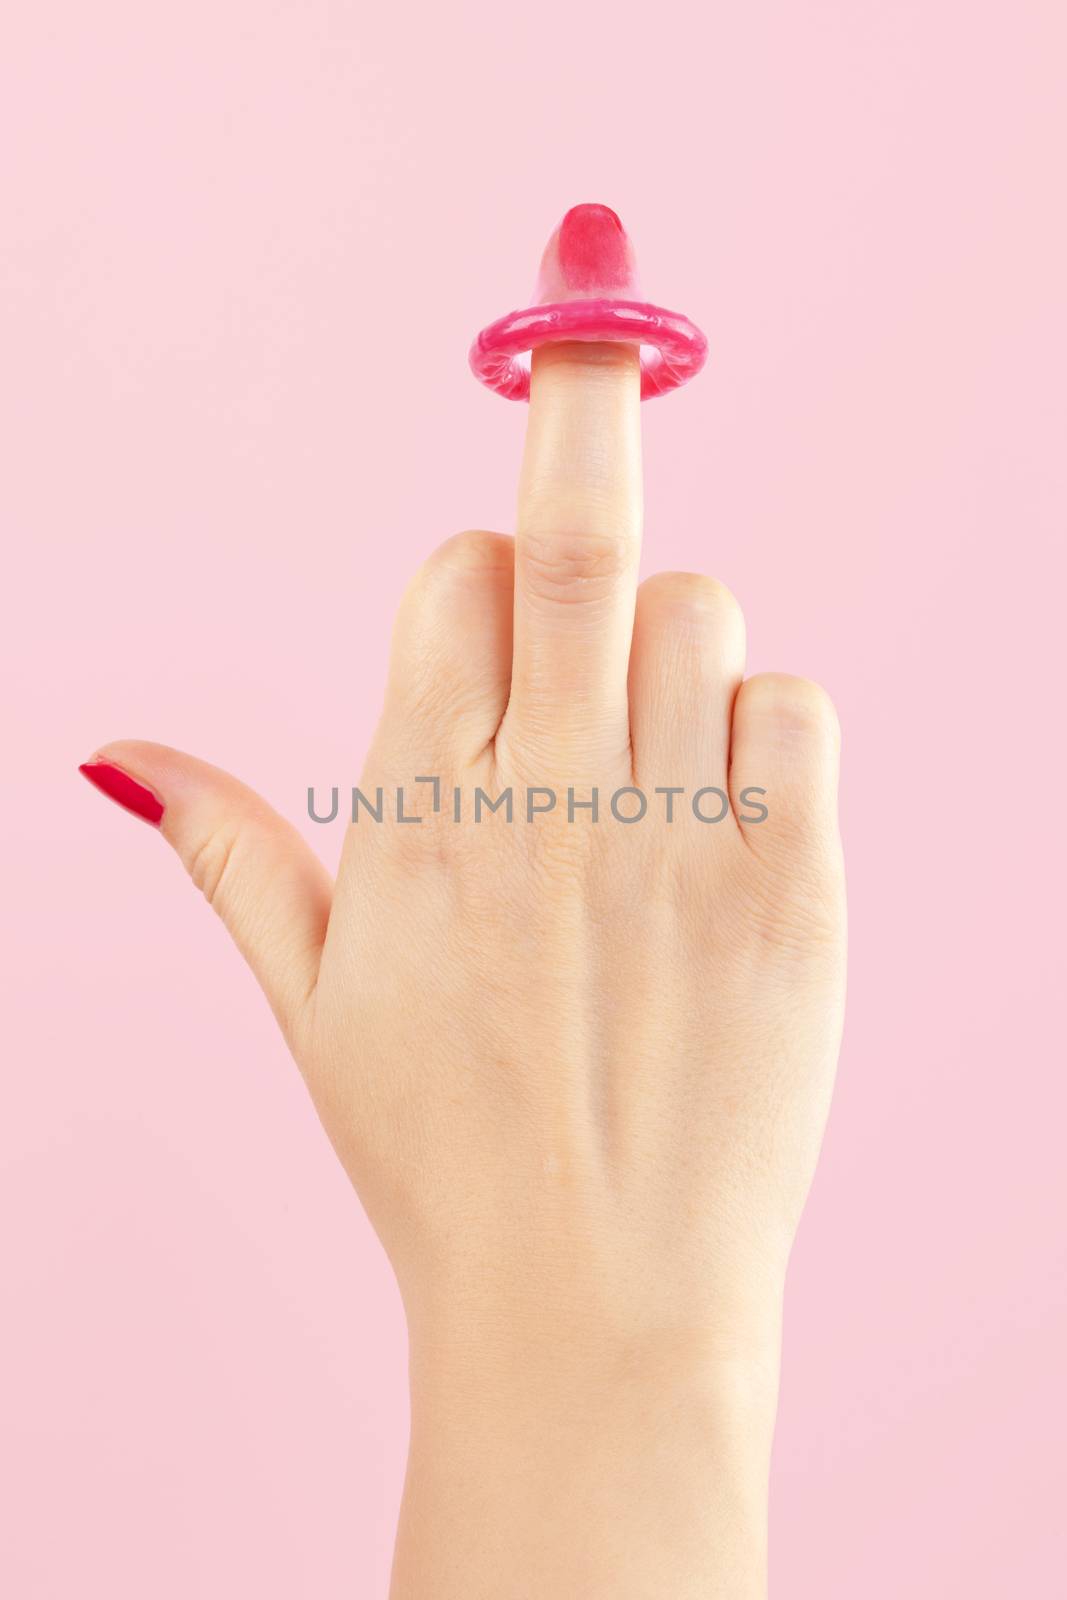 Female hand with red nails holding pink condom isolated on pink background. Safe sex and birth control concept. 